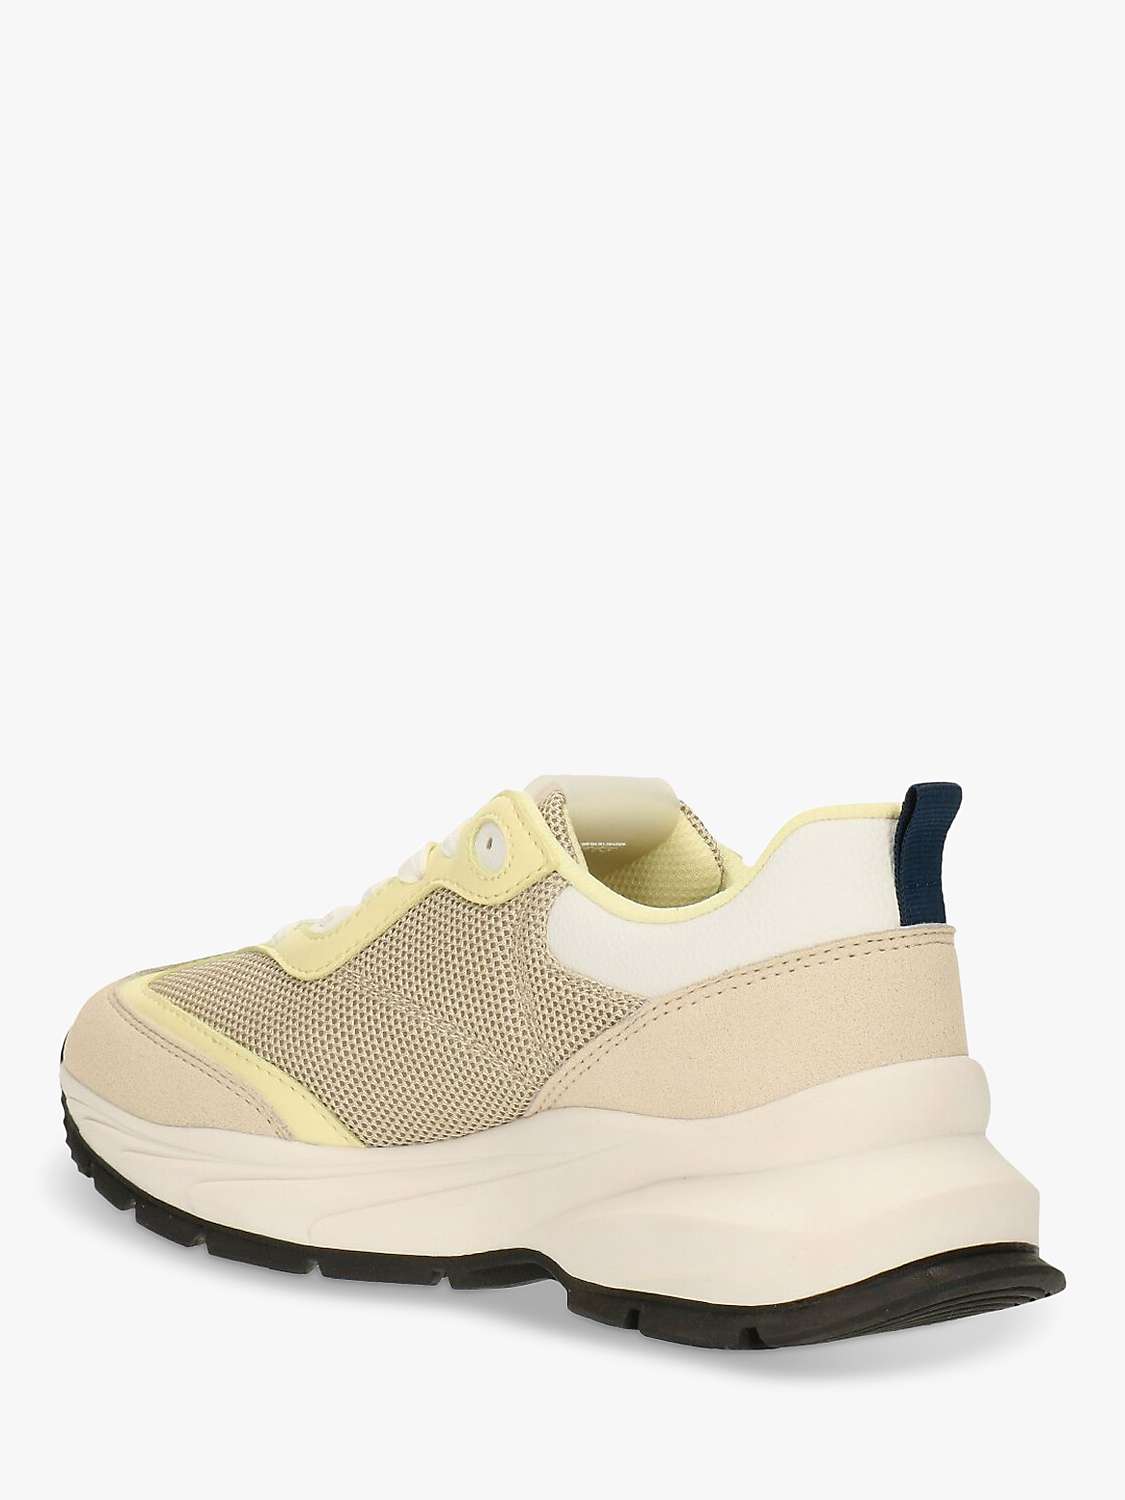 Buy Gap Kids' Aurora Lace Up Trainers Online at johnlewis.com